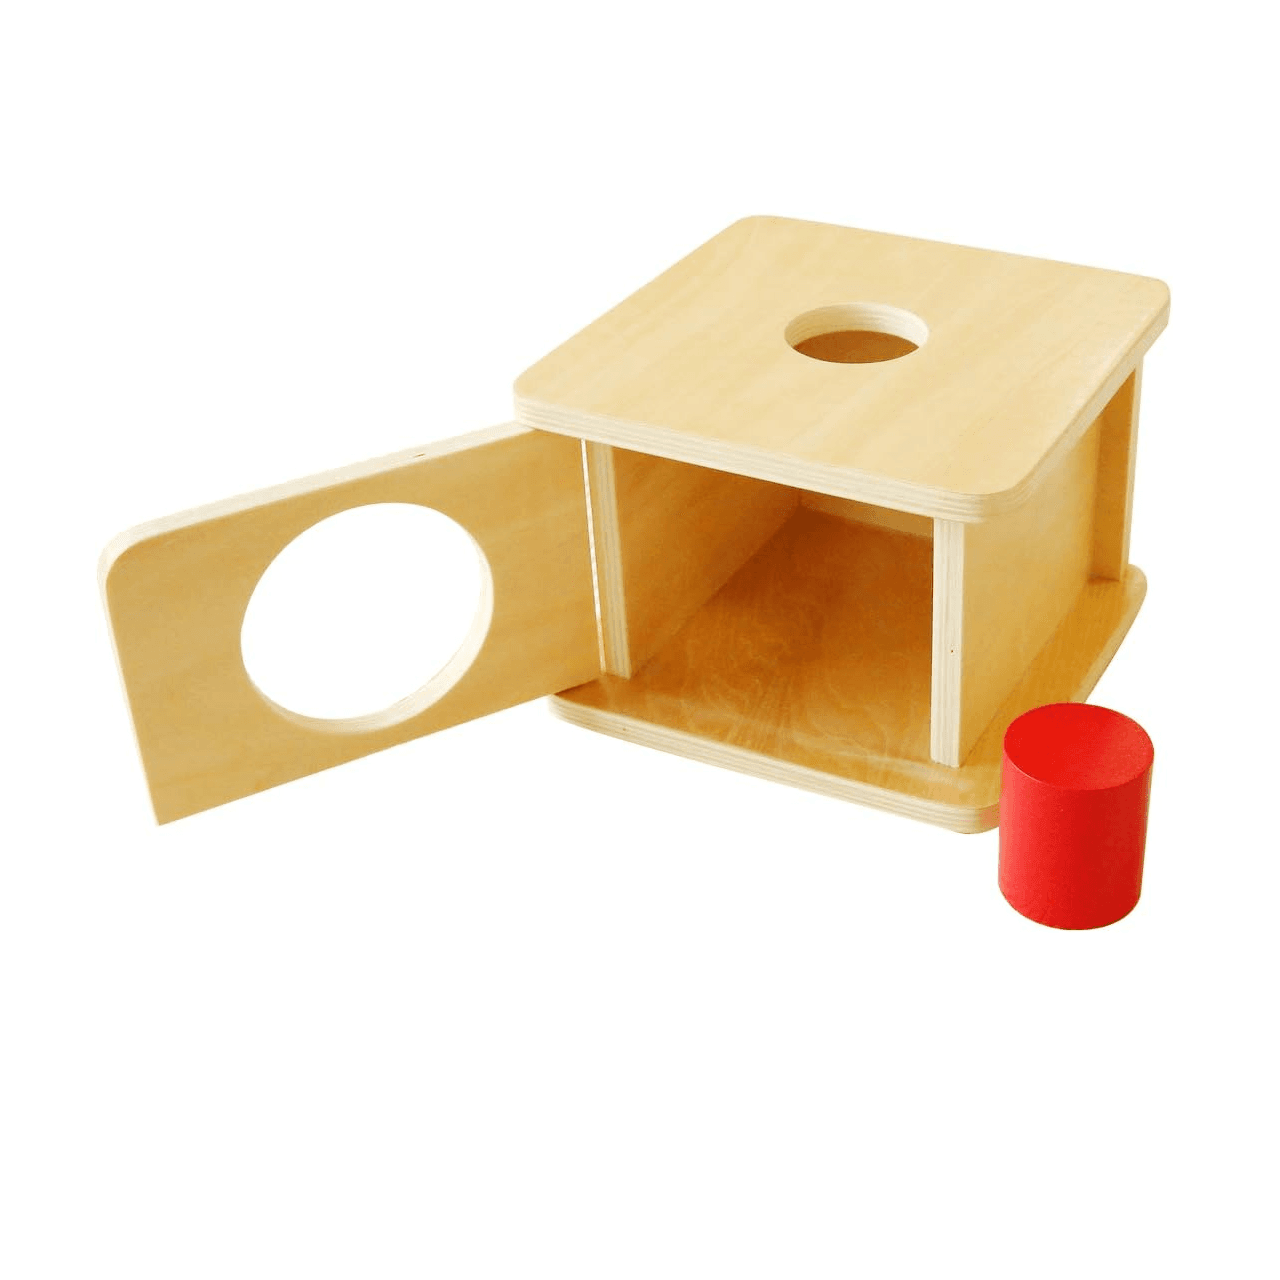 Montessori Montessori Outlet Imbucare Box With Large Cylinder